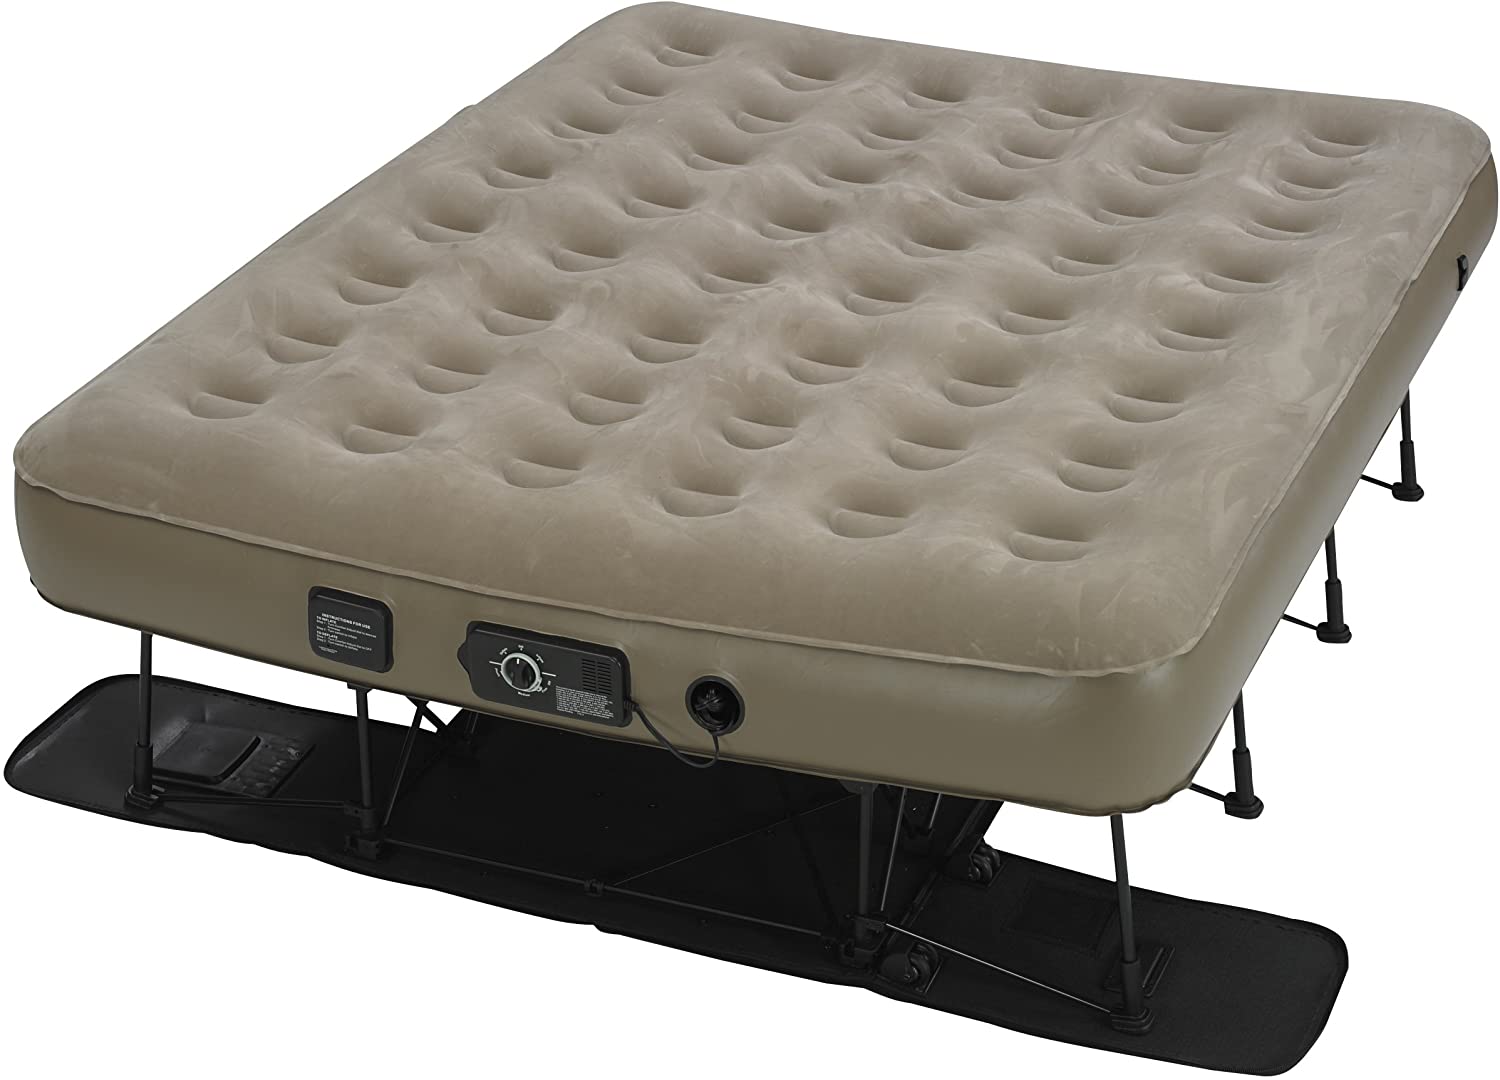 double size air camping mattress